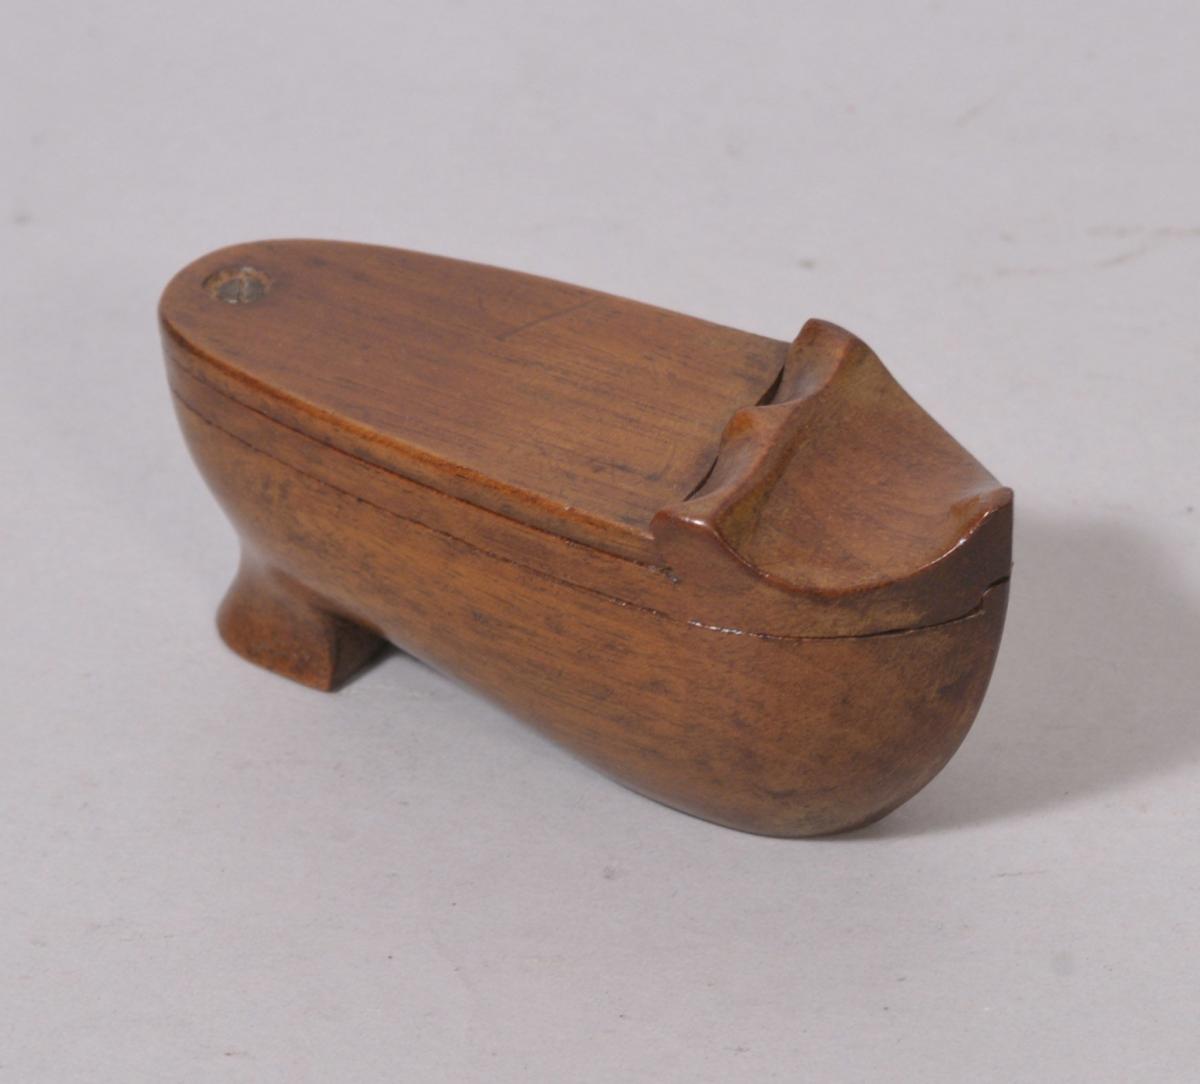 S/2381 Antique Treen 19th Century Mahogany Snuff Puzzle Box in the Form of a Shoe